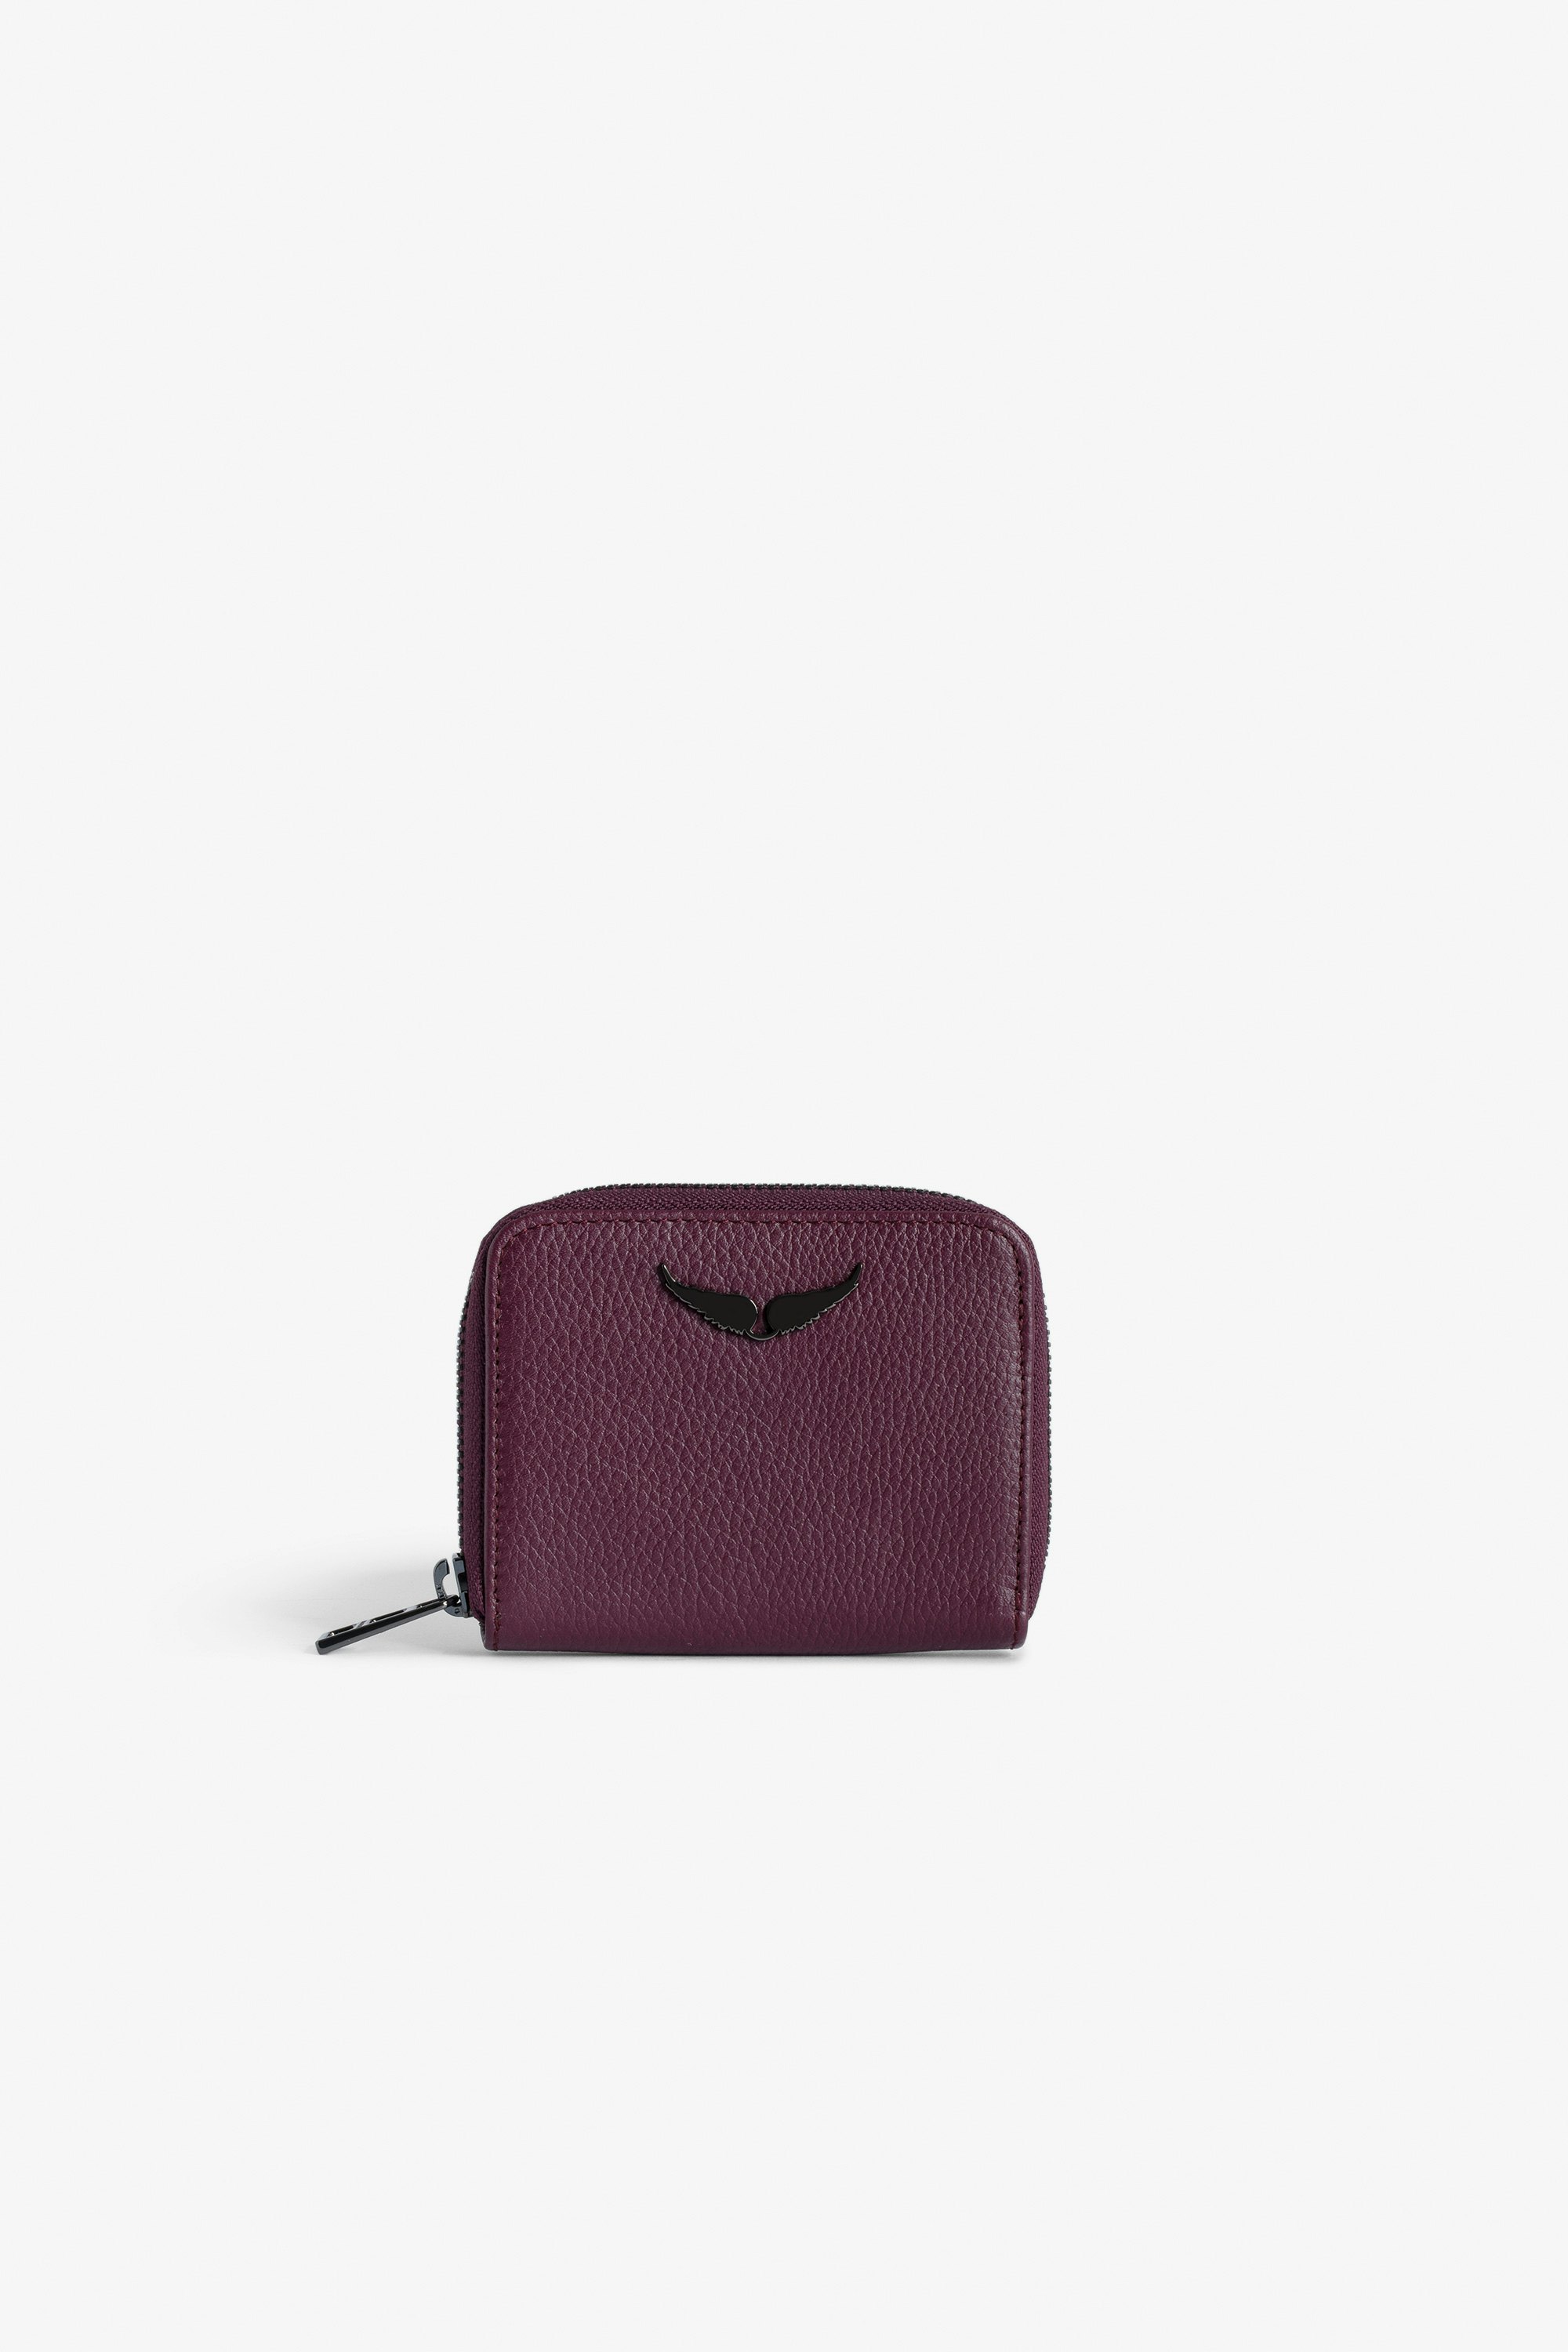 Mini ZV Coin Purse - Women’s burgundy grained leather wallet with wings charm.